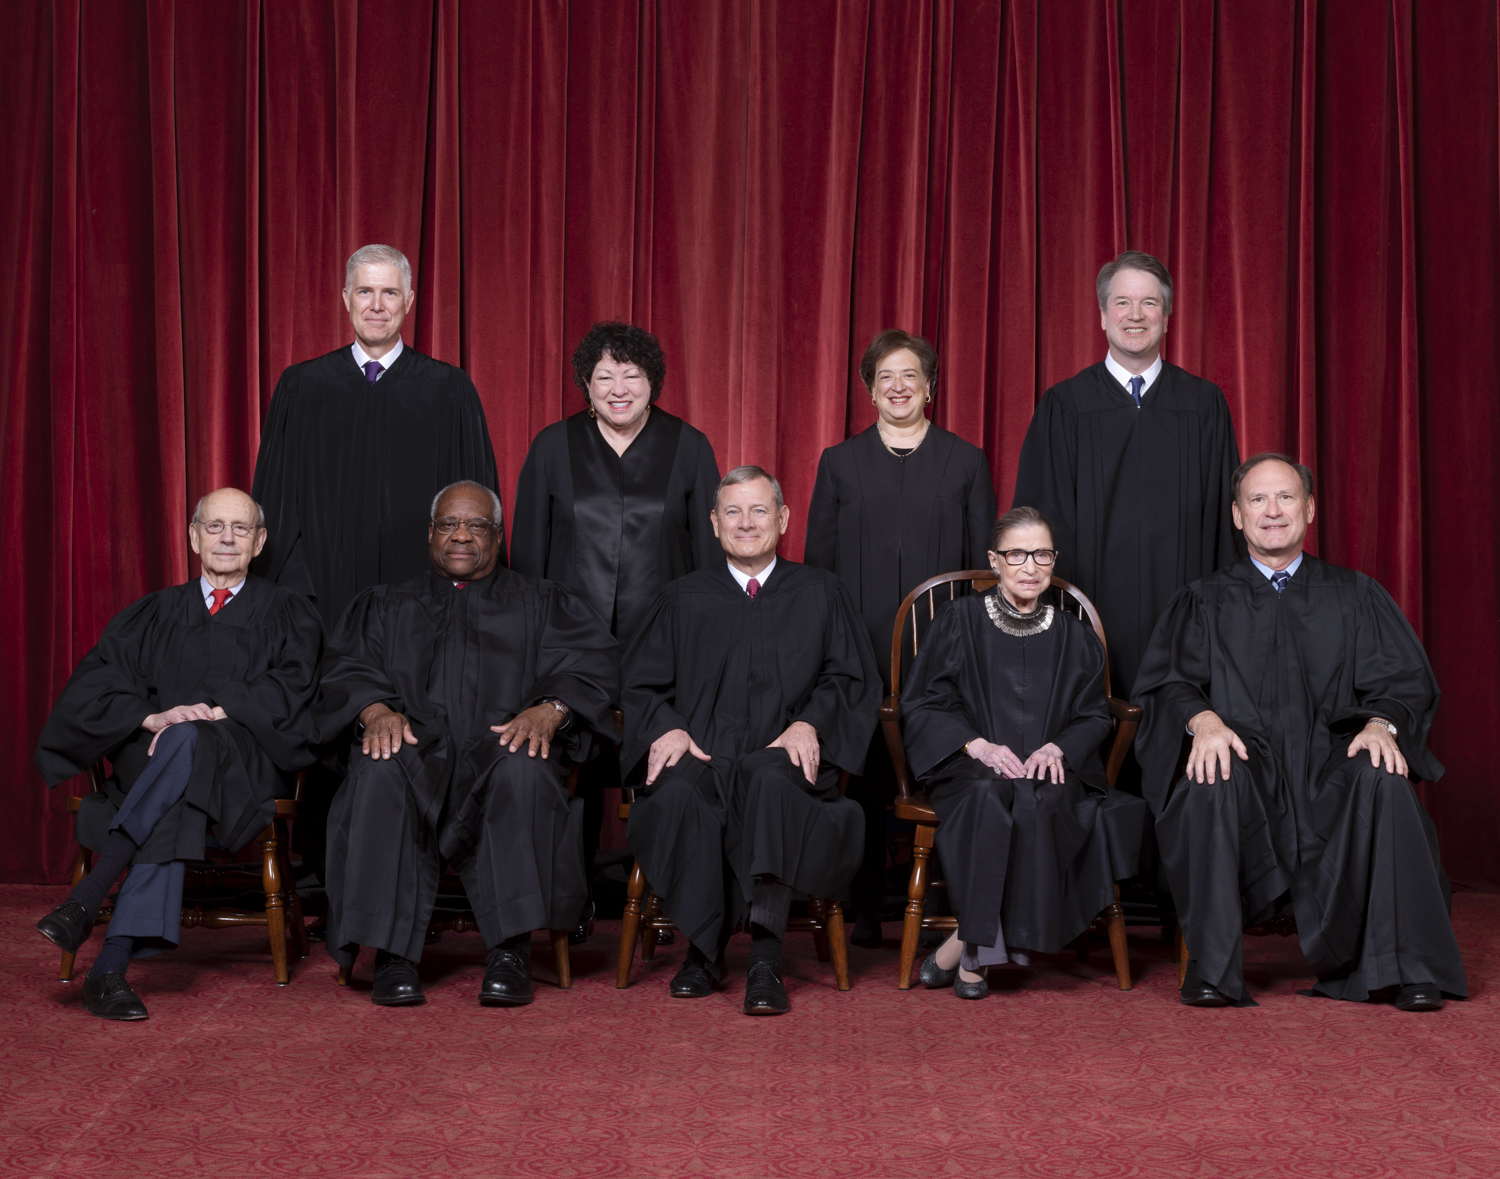 Supreme Court - Credit: Fred Schilling, Collection of the Supreme Court of the United States